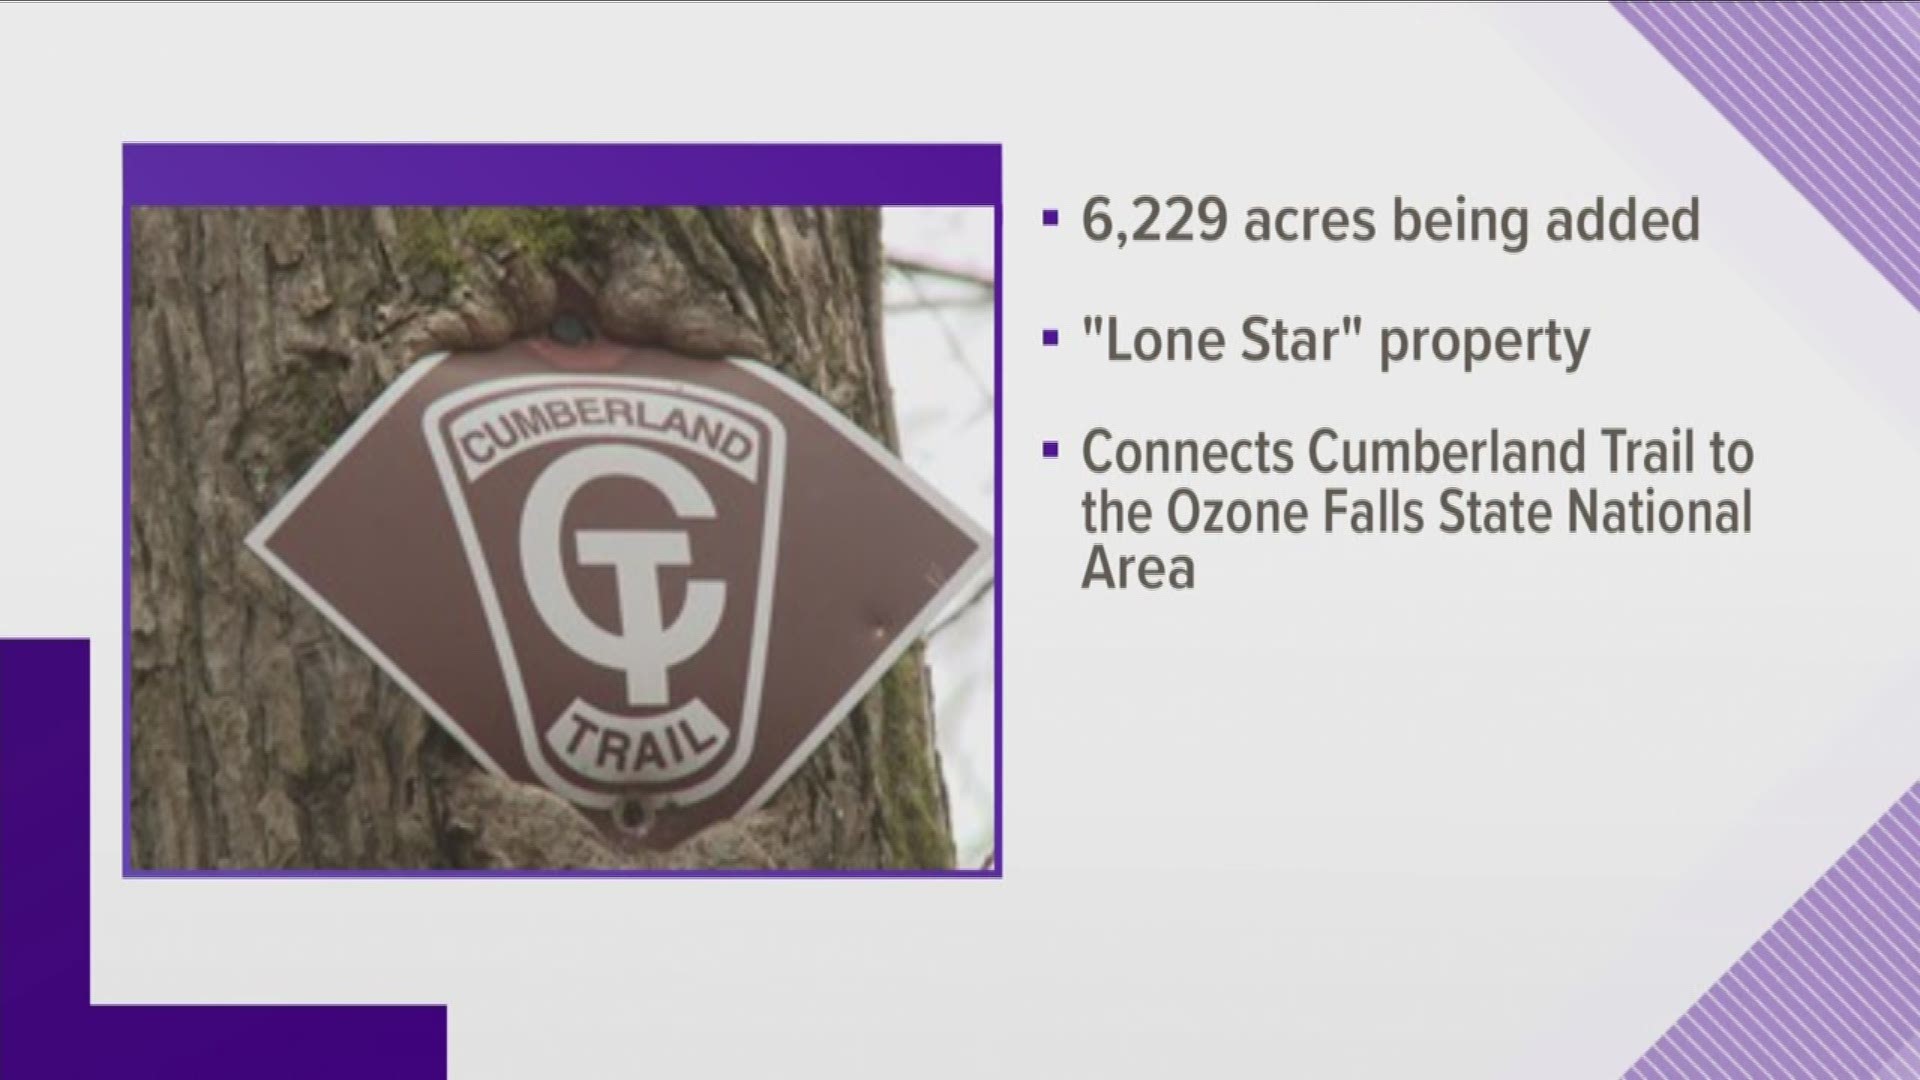 The "Lone Star" property will connect the Cumberland Trail State Park to the Ozone Falls natural area.